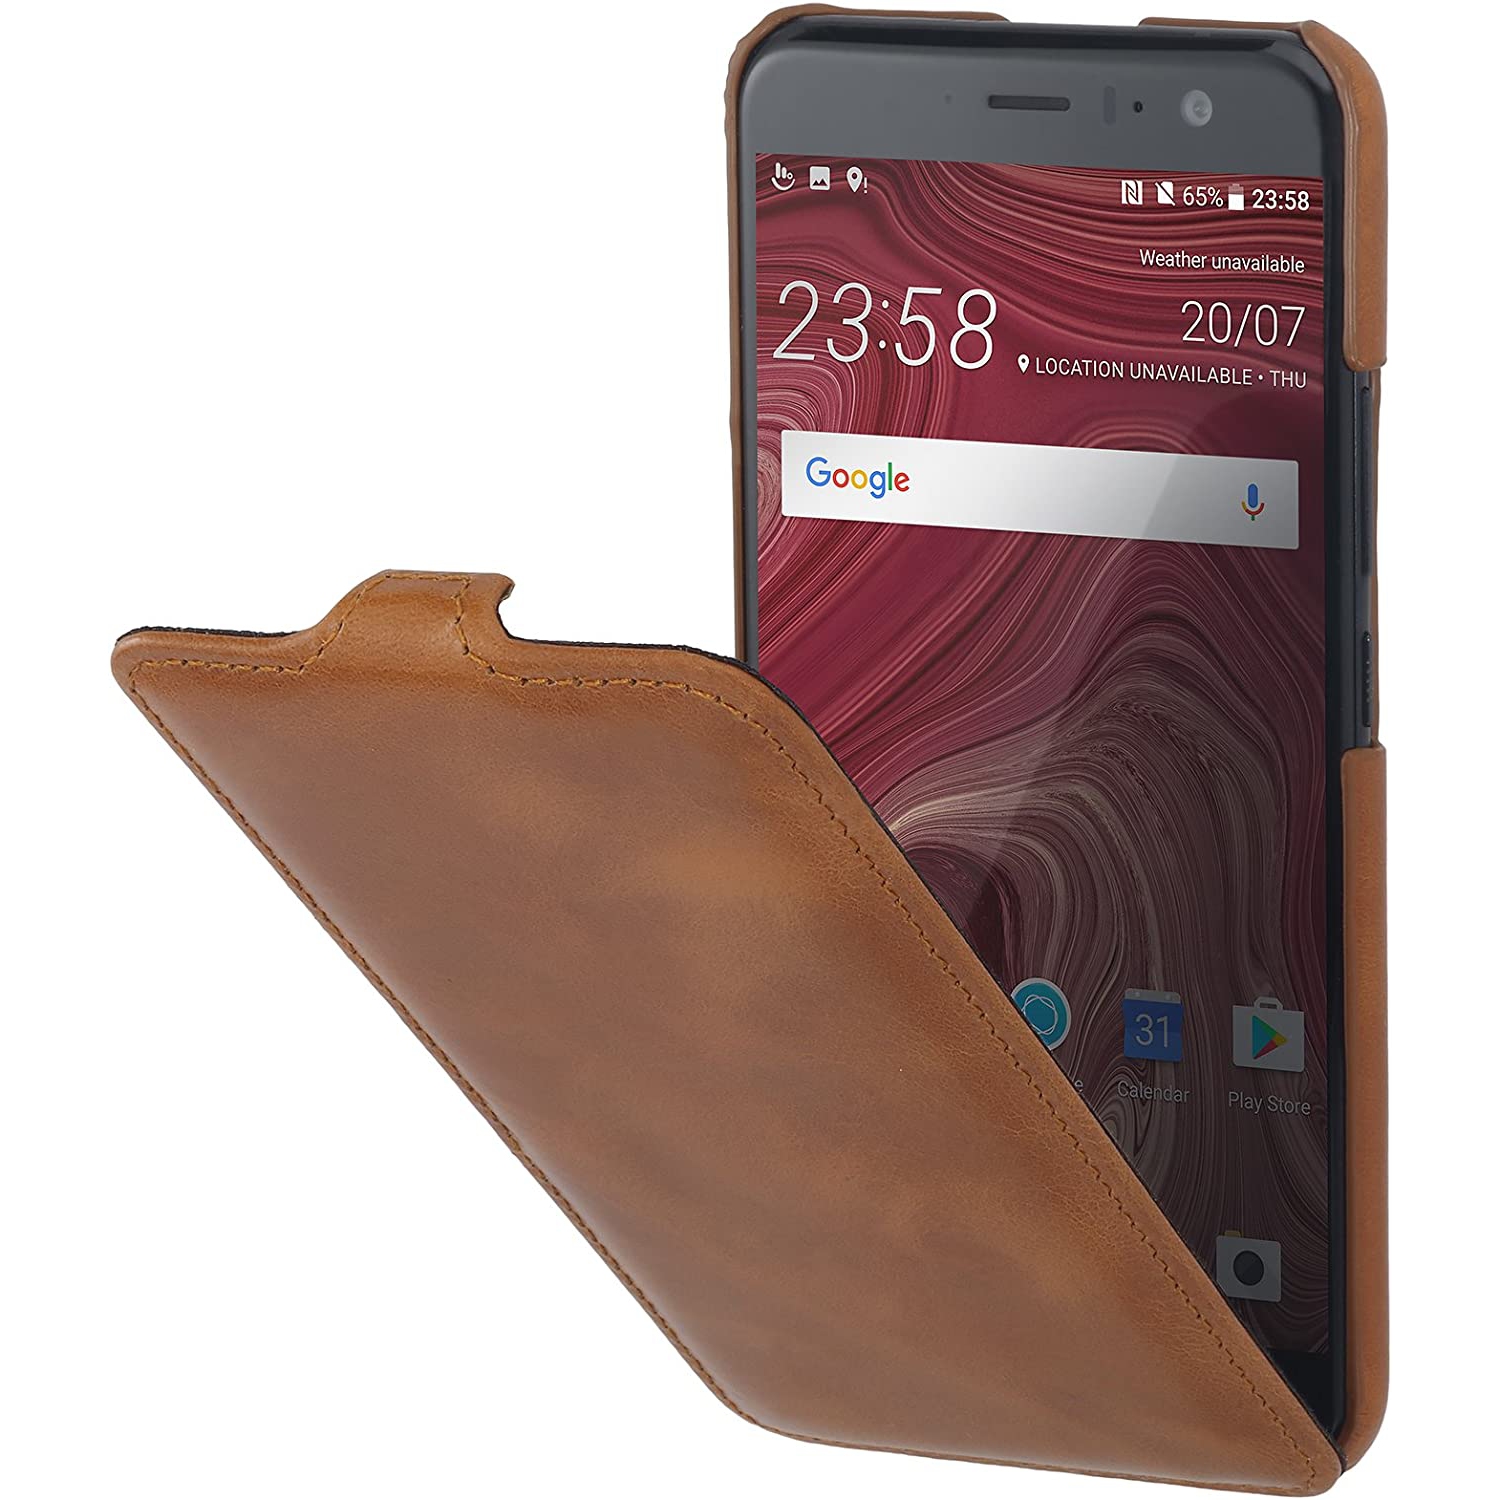 Genuine Leather Flip Case for HTC U11, UltraSlim Cover for HTC U 11 with Clip, Cognac Brown